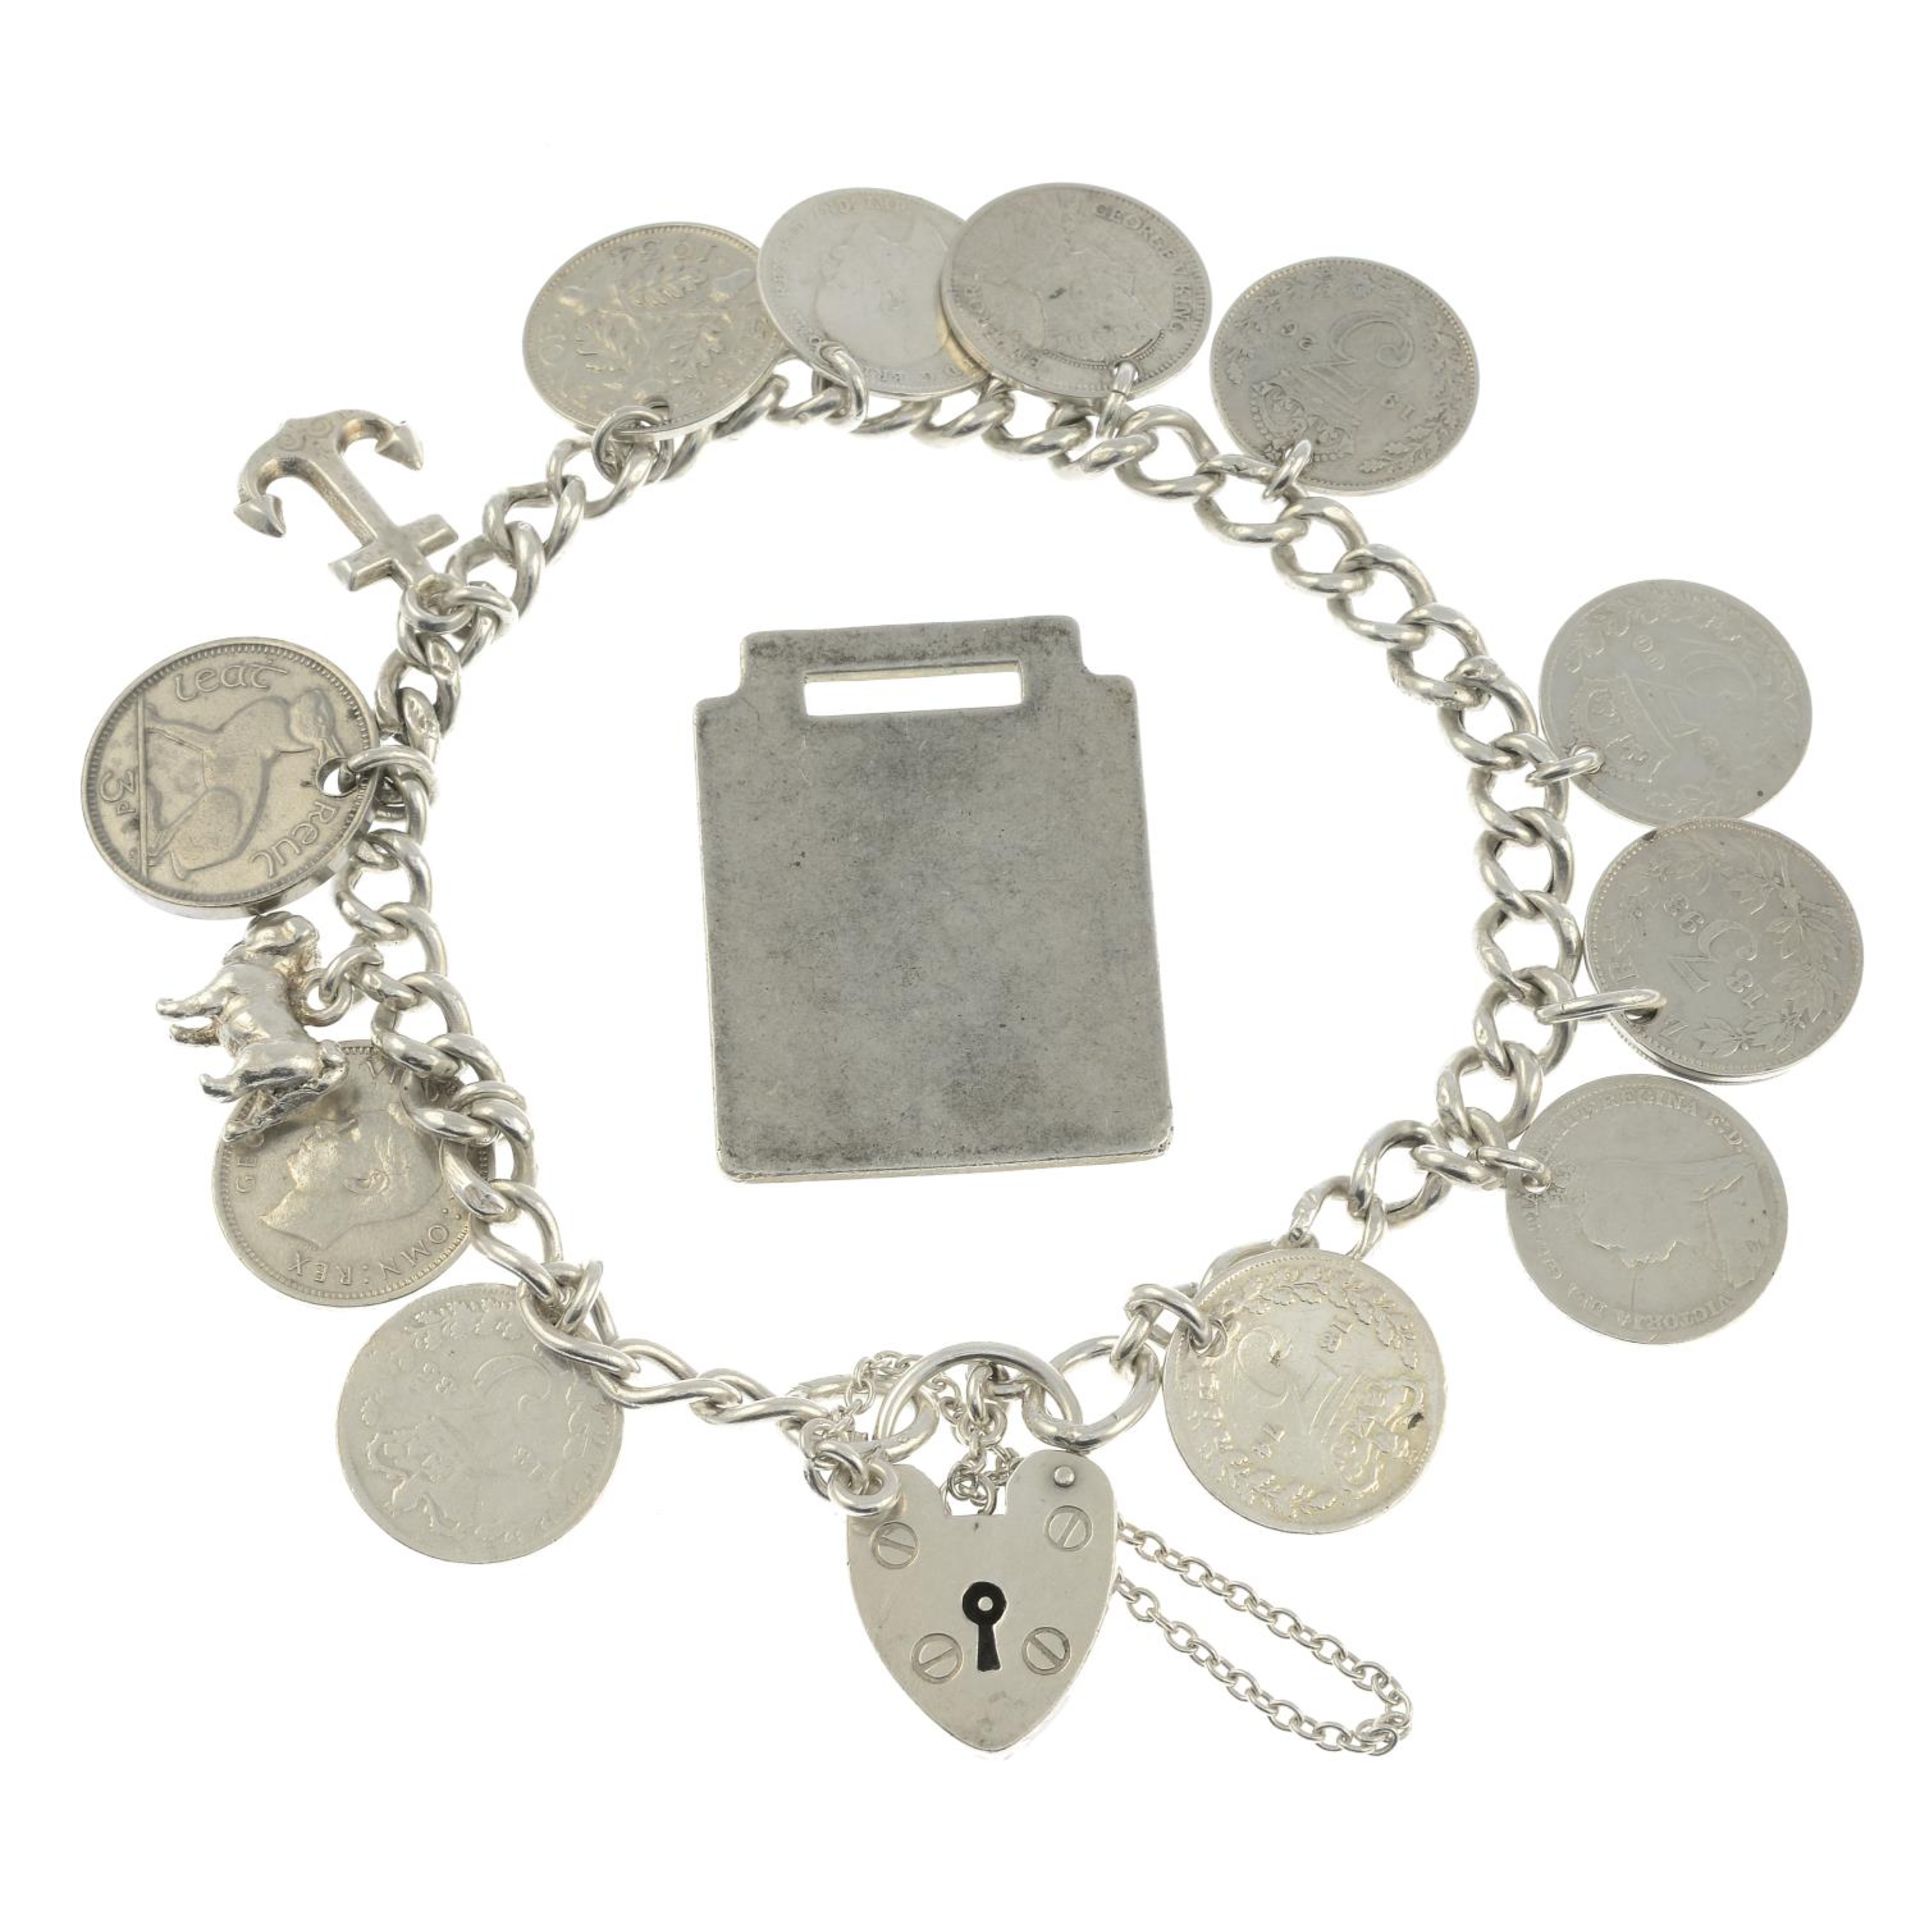 Two silver charm bracelets, - Image 2 of 2